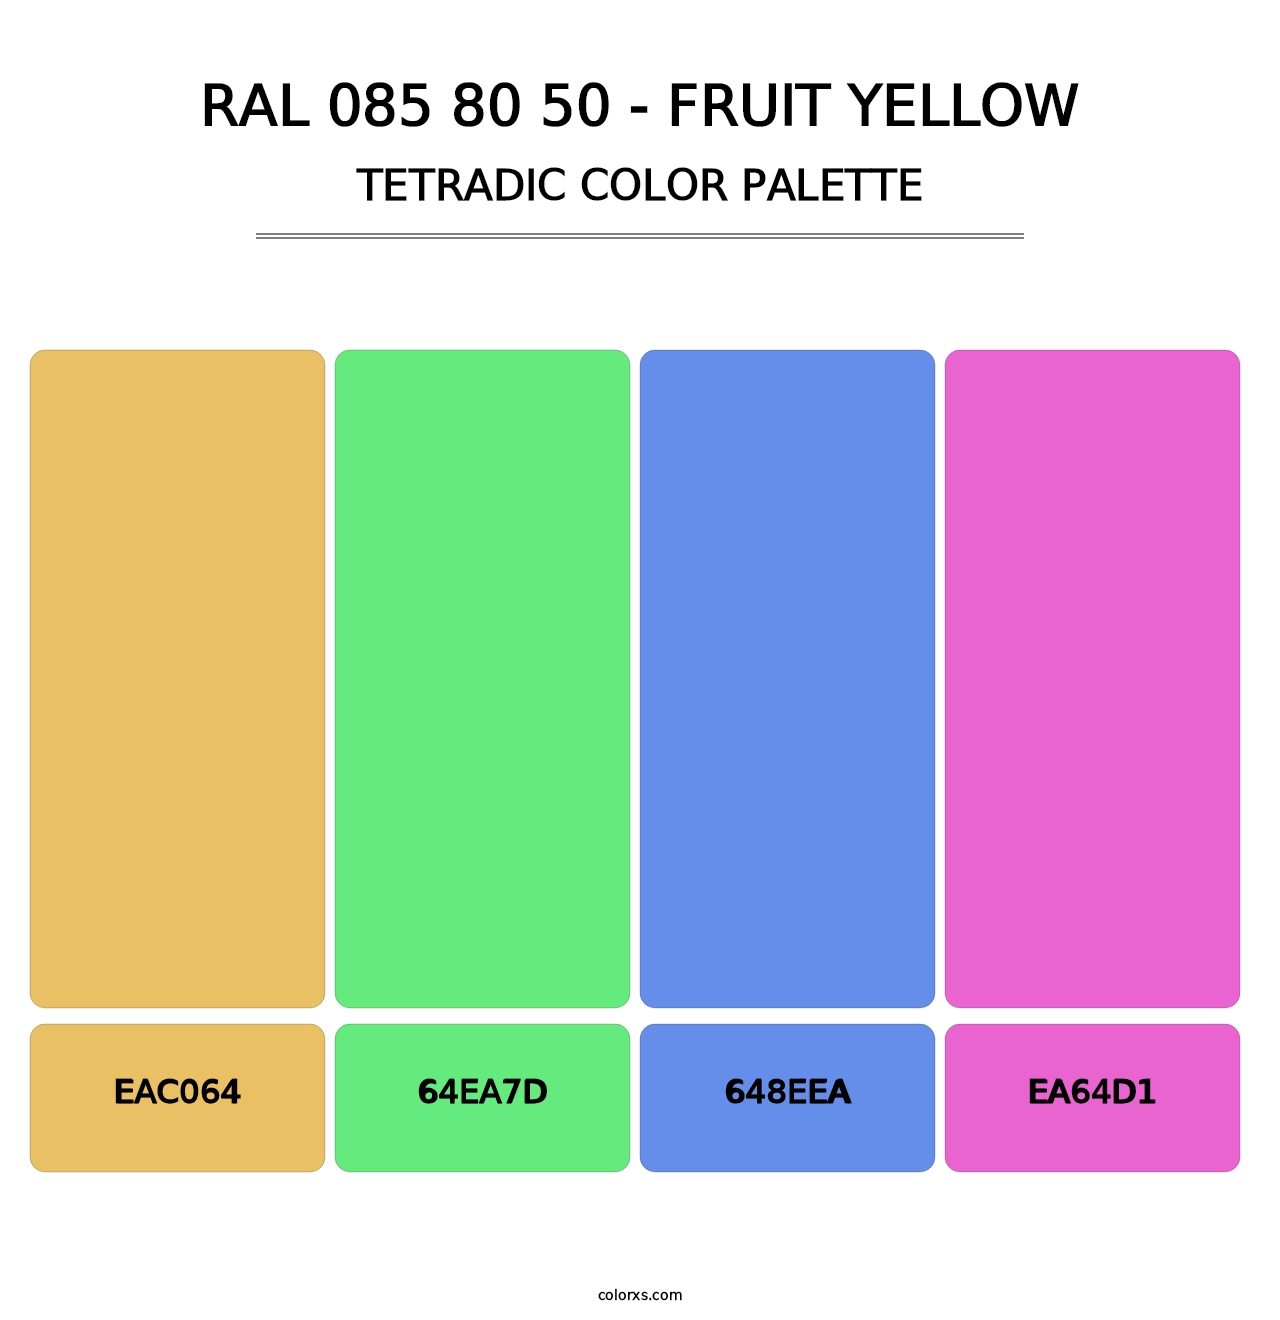 RAL 085 80 50 - Fruit Yellow - Tetradic Color Palette